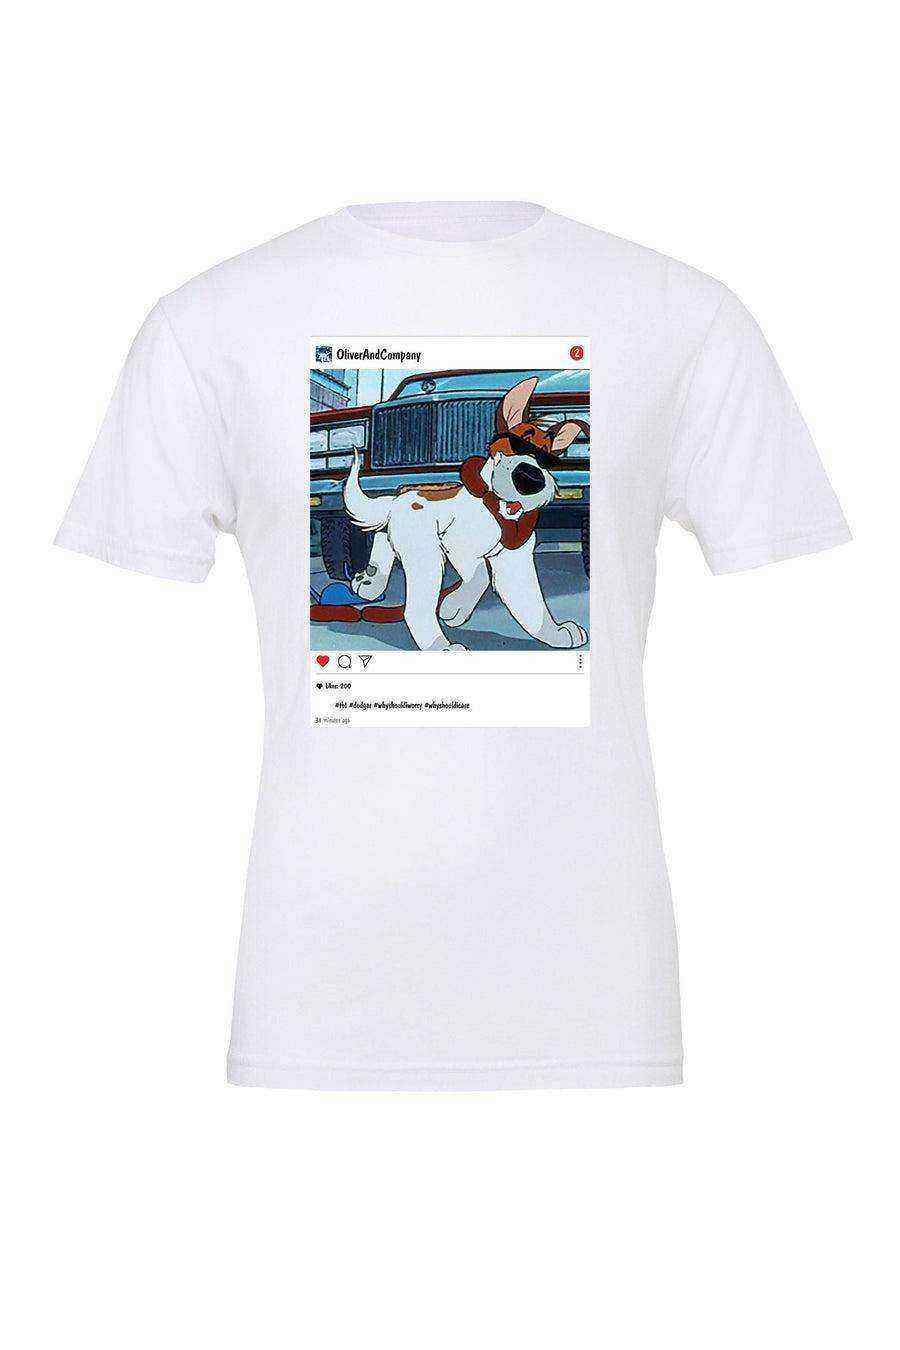 Insta Throw Back Shirt | Oliver And Company - Dylan's Tees